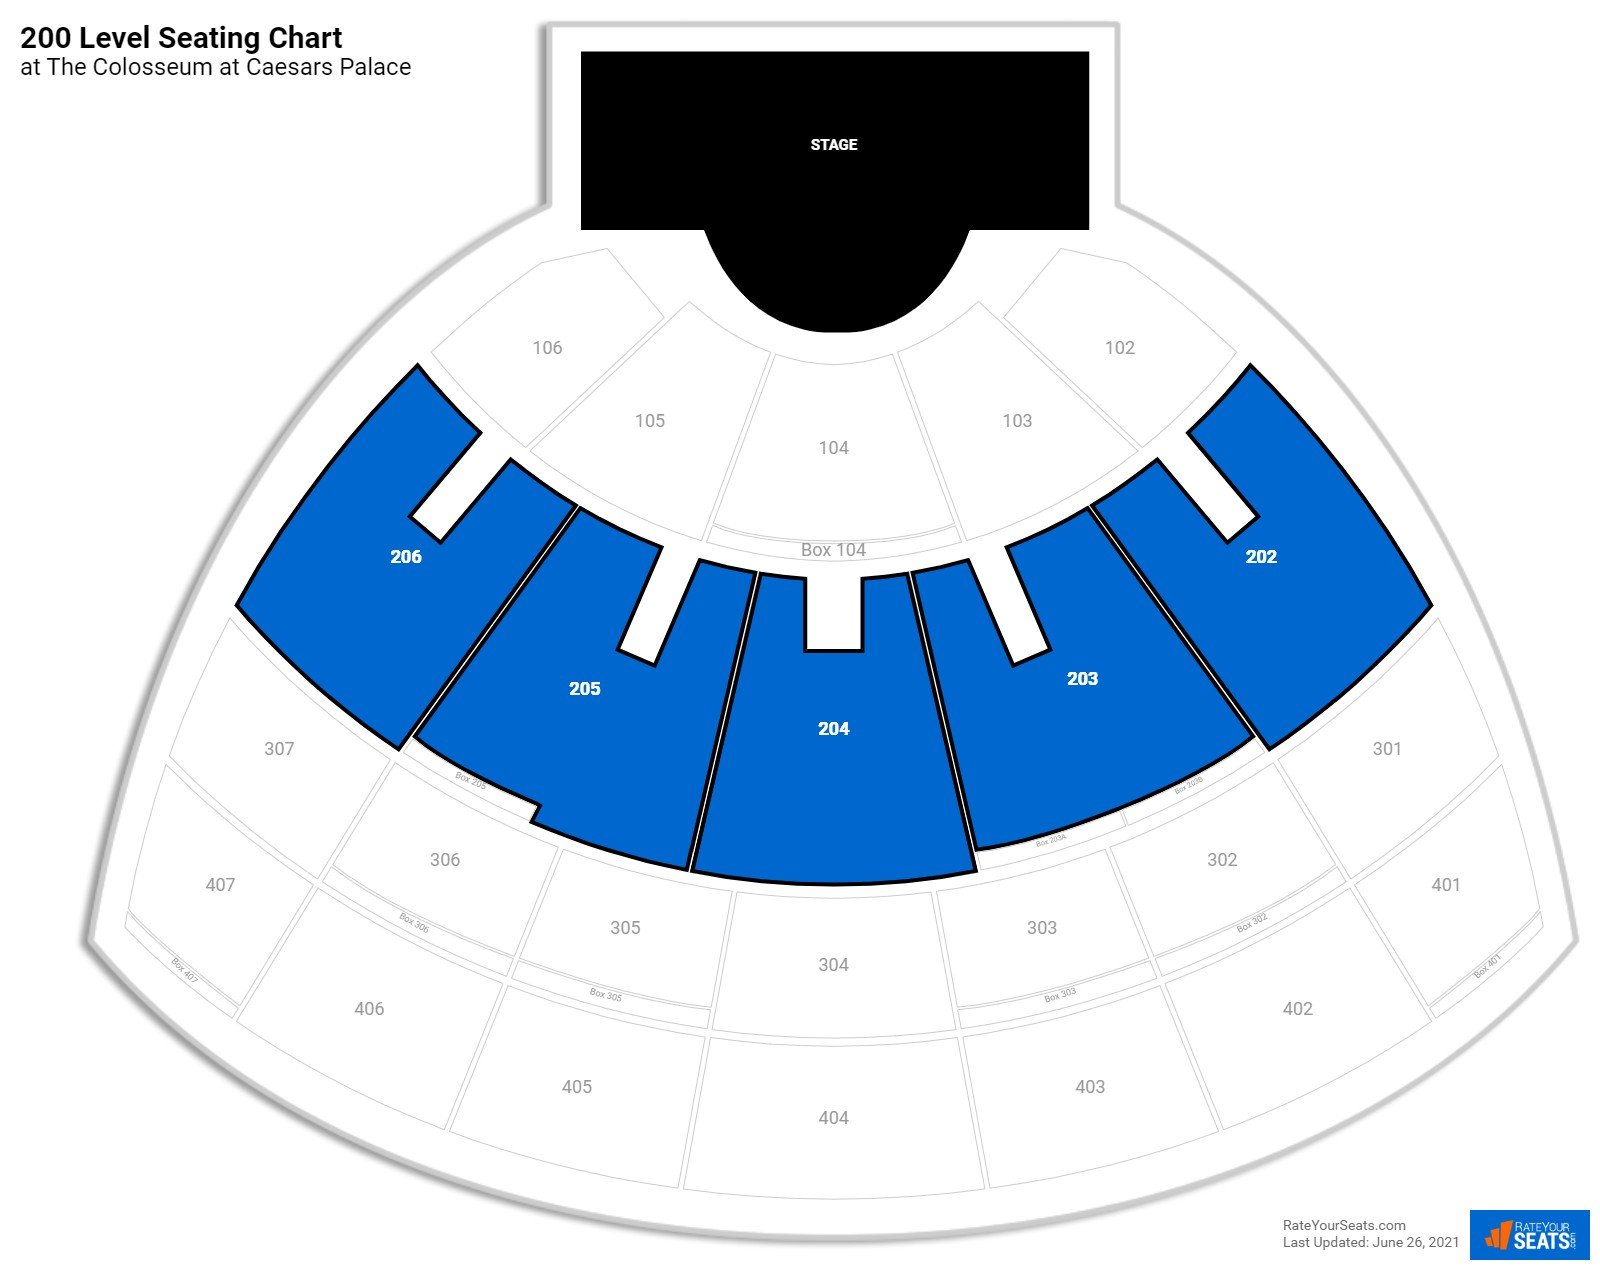 Concert 200 Level Seating Chart at The Colosseum at Caesars Palace